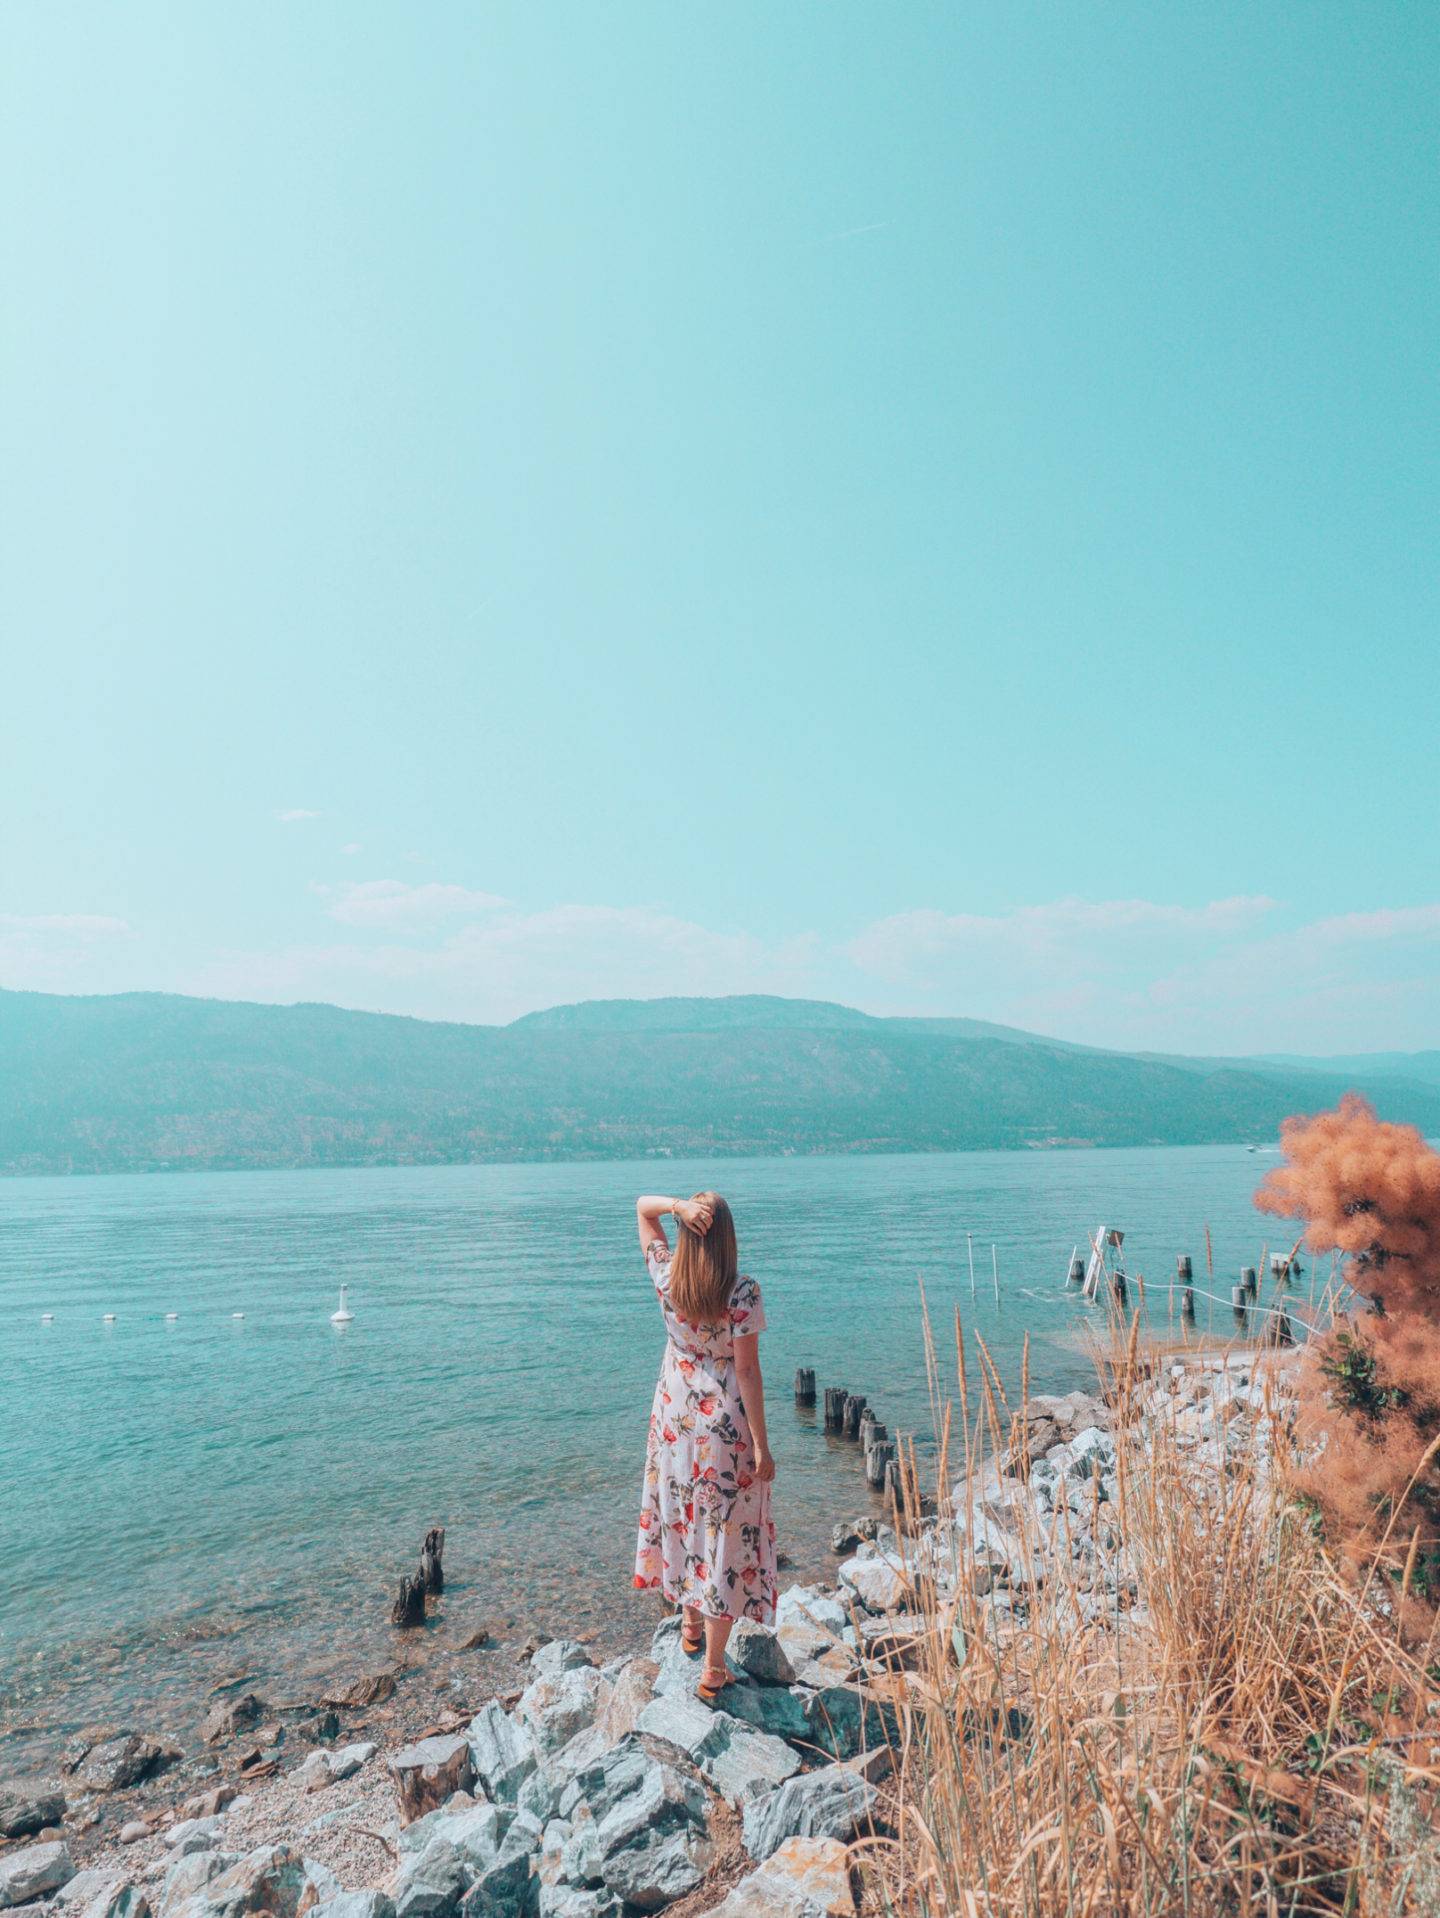 Looking for the most beautiful Instagrammable places in Kelowna? Check out this guide to find the best photography spots in Kelowna! 

Pictured here: Okanagan Lake